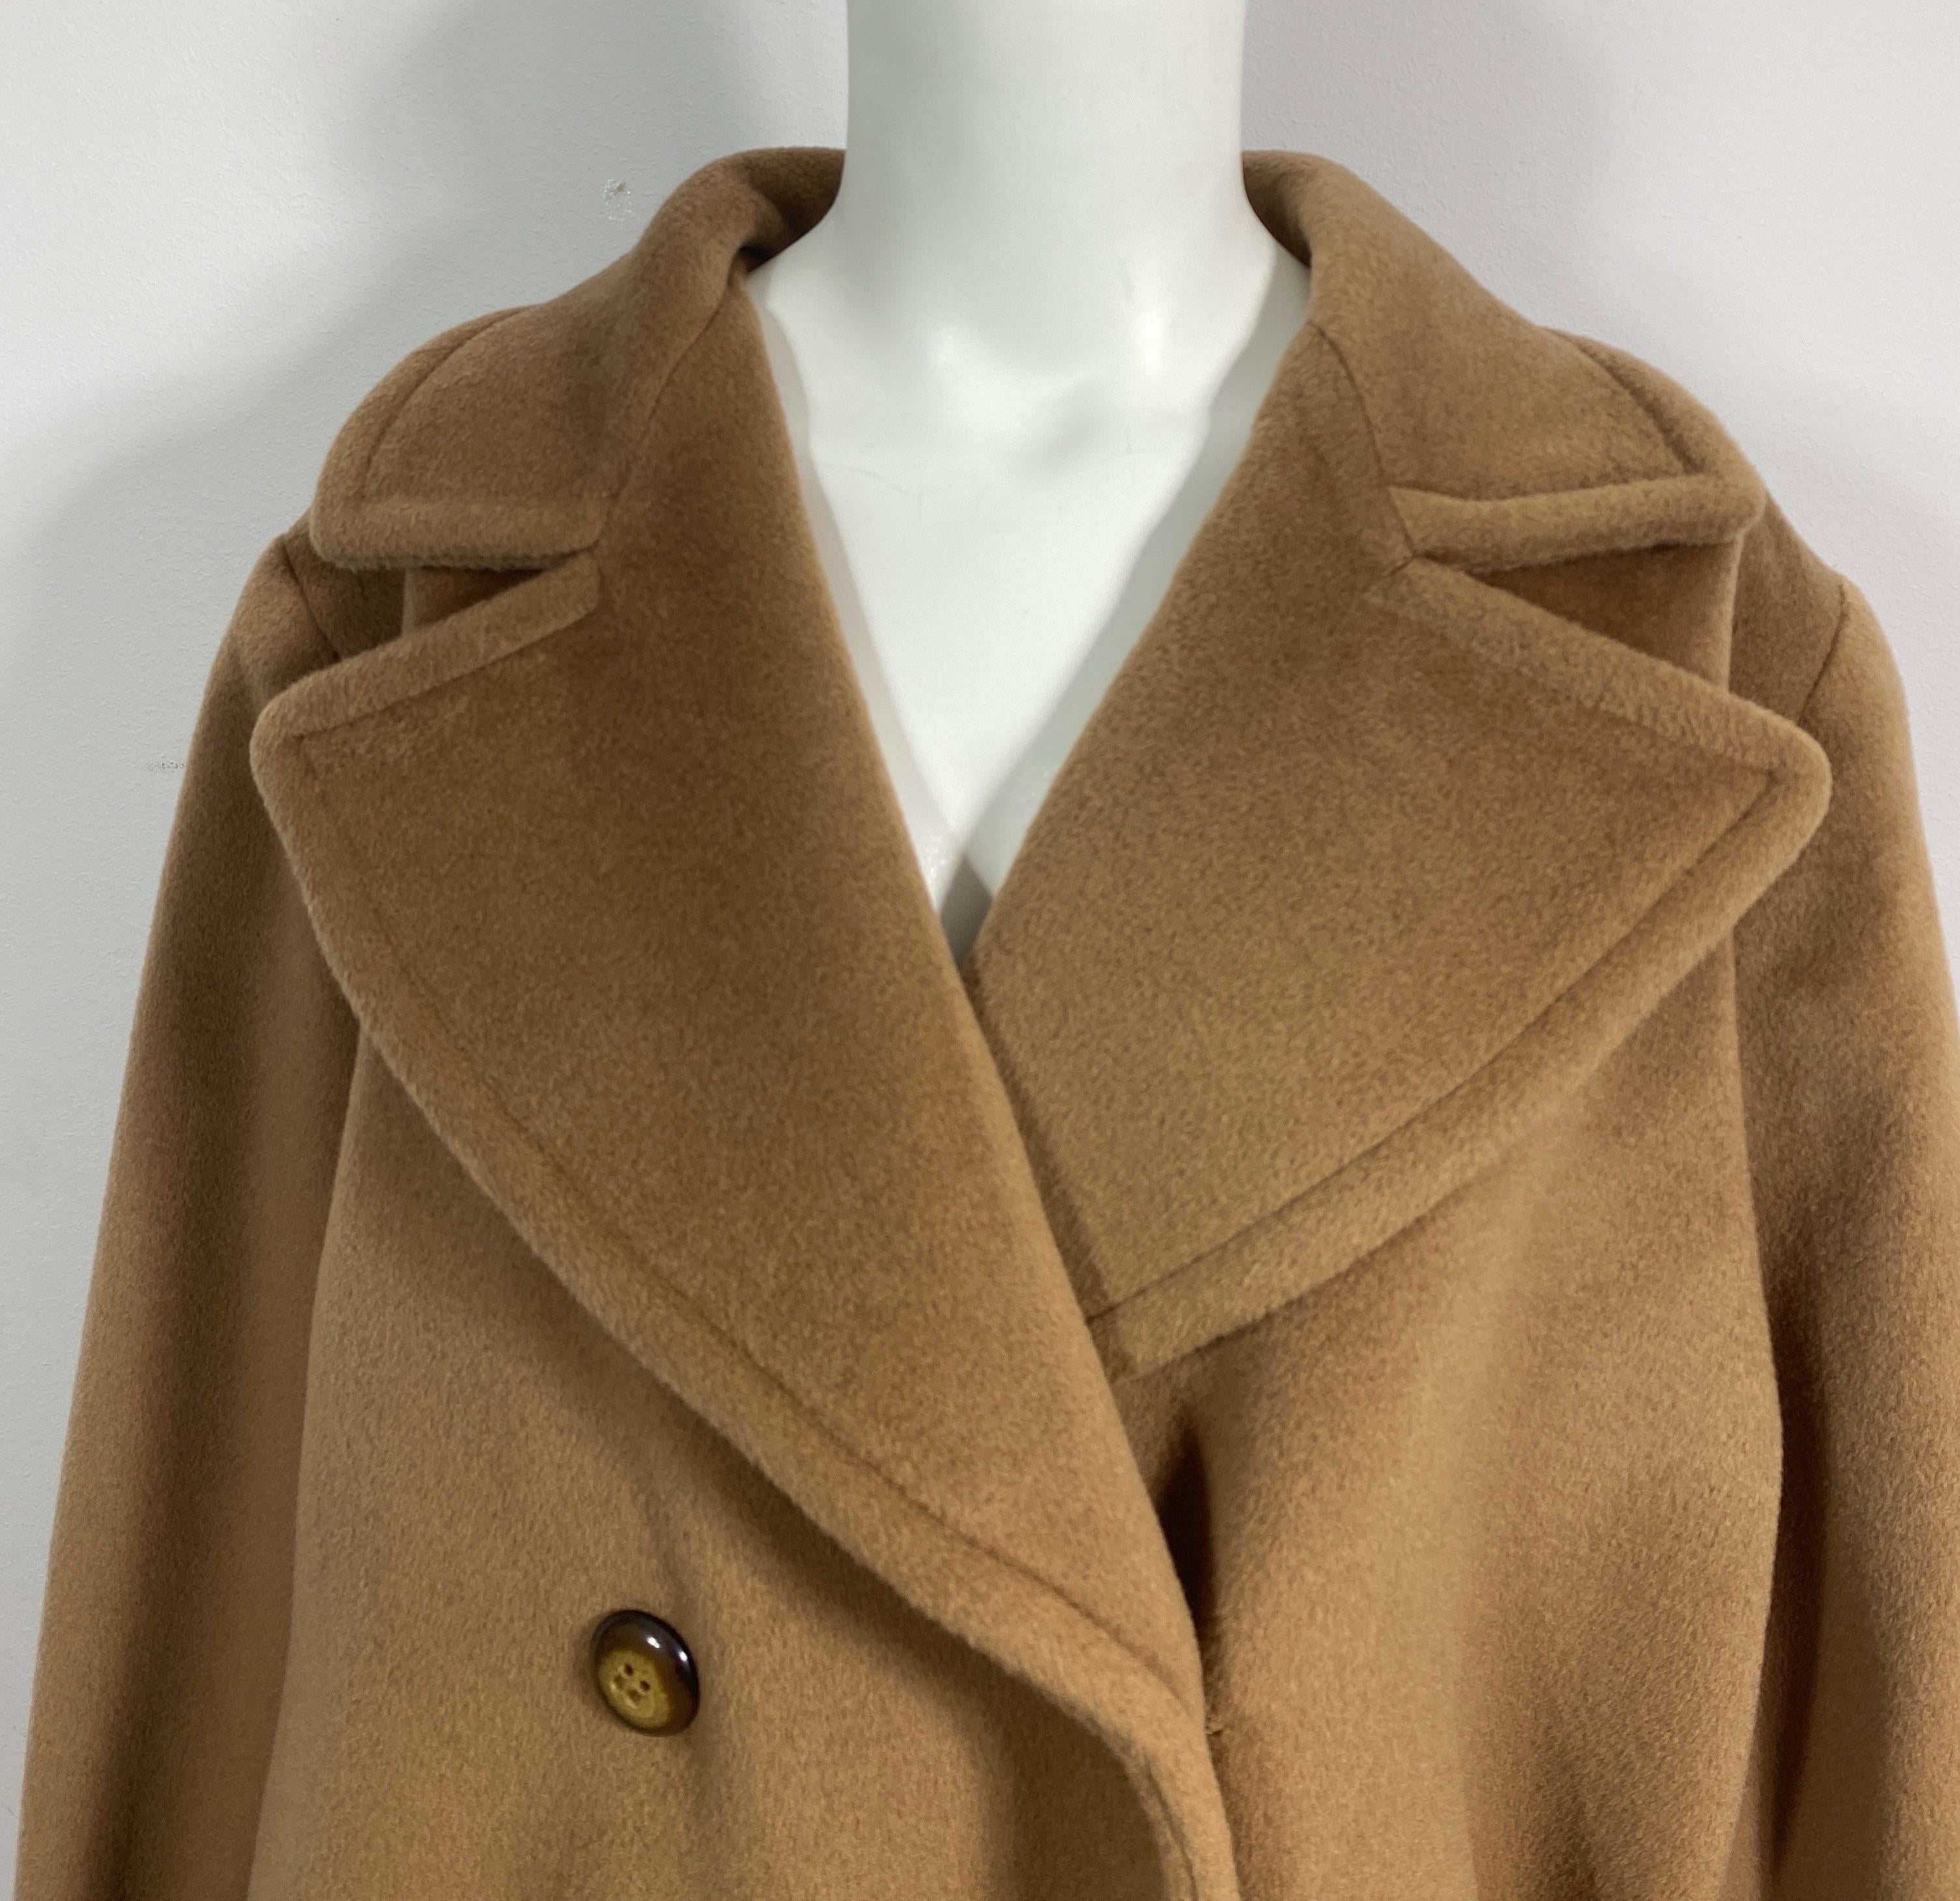 Valentino Boutique 1990’s Double Breasted Tan Cashmere Oversized Coat - Size 10 For Sale 3